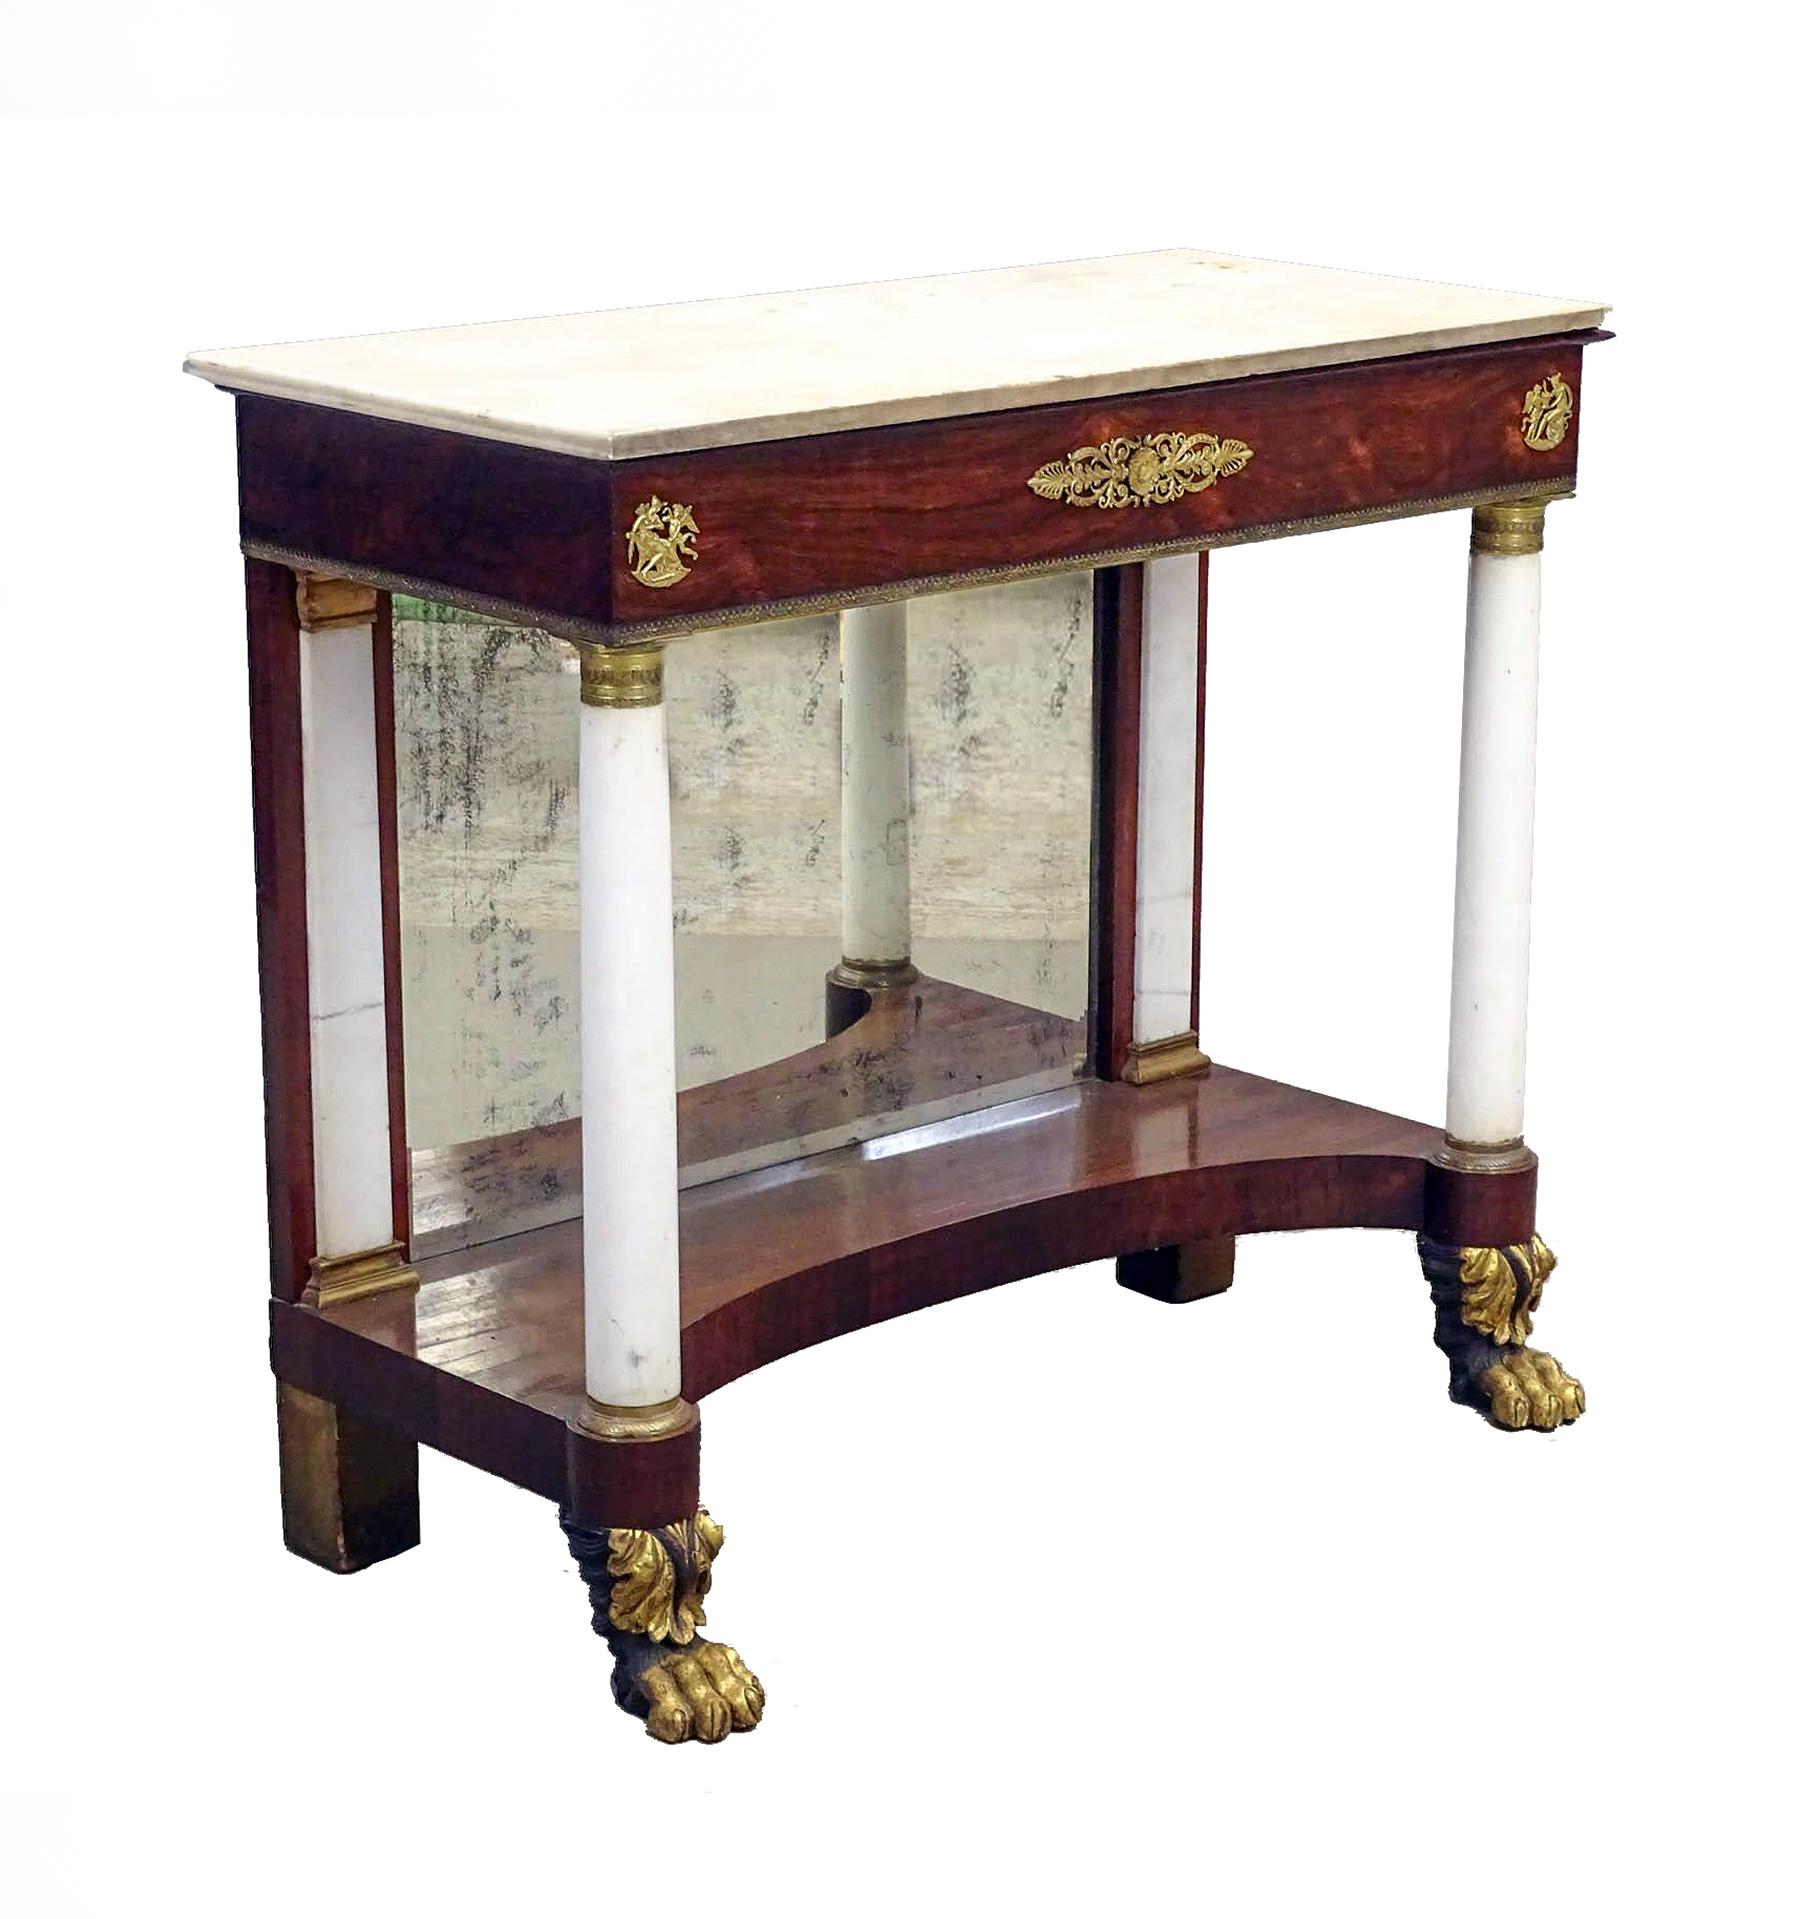 An elegant American classical pier table in rich Rosewood with Carrara marble columns and pilasters. Fine gilt bronze ormolu capitals, bases, and Roman motifs decorate the table, which retains its original marble top and mercury silver mirror. The